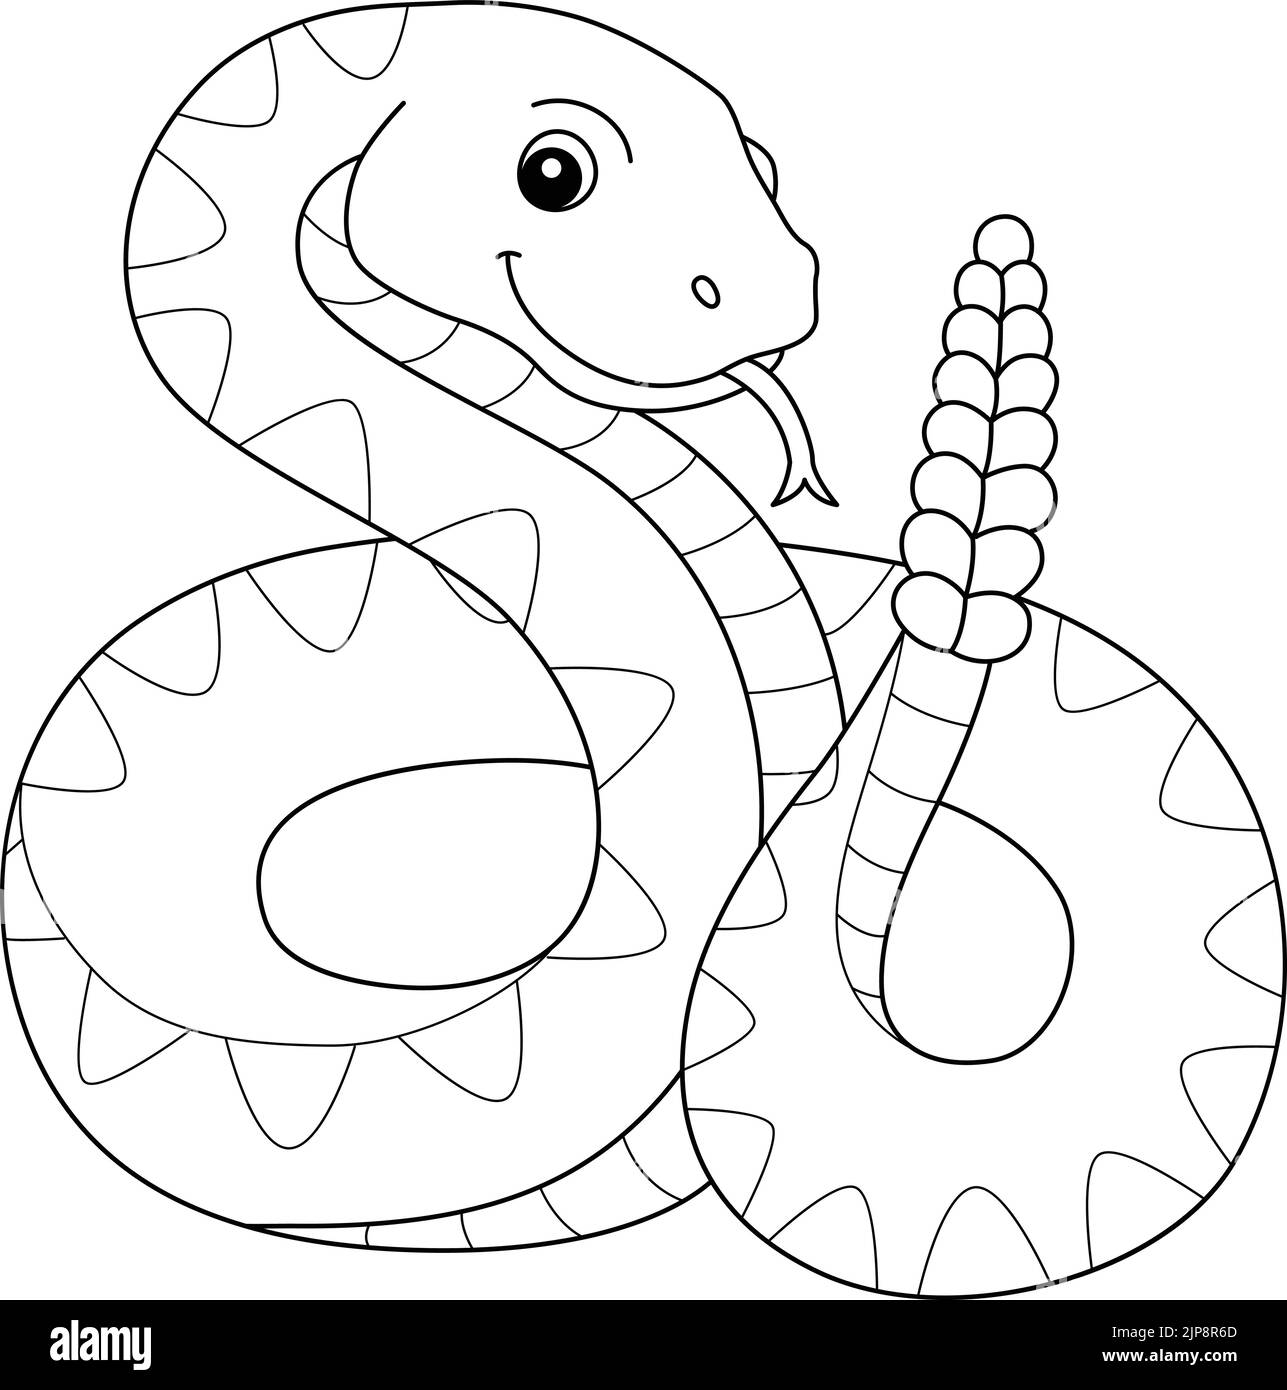 Rattlesnake Animal Isolated Coloring Page for Kids Stock Vector